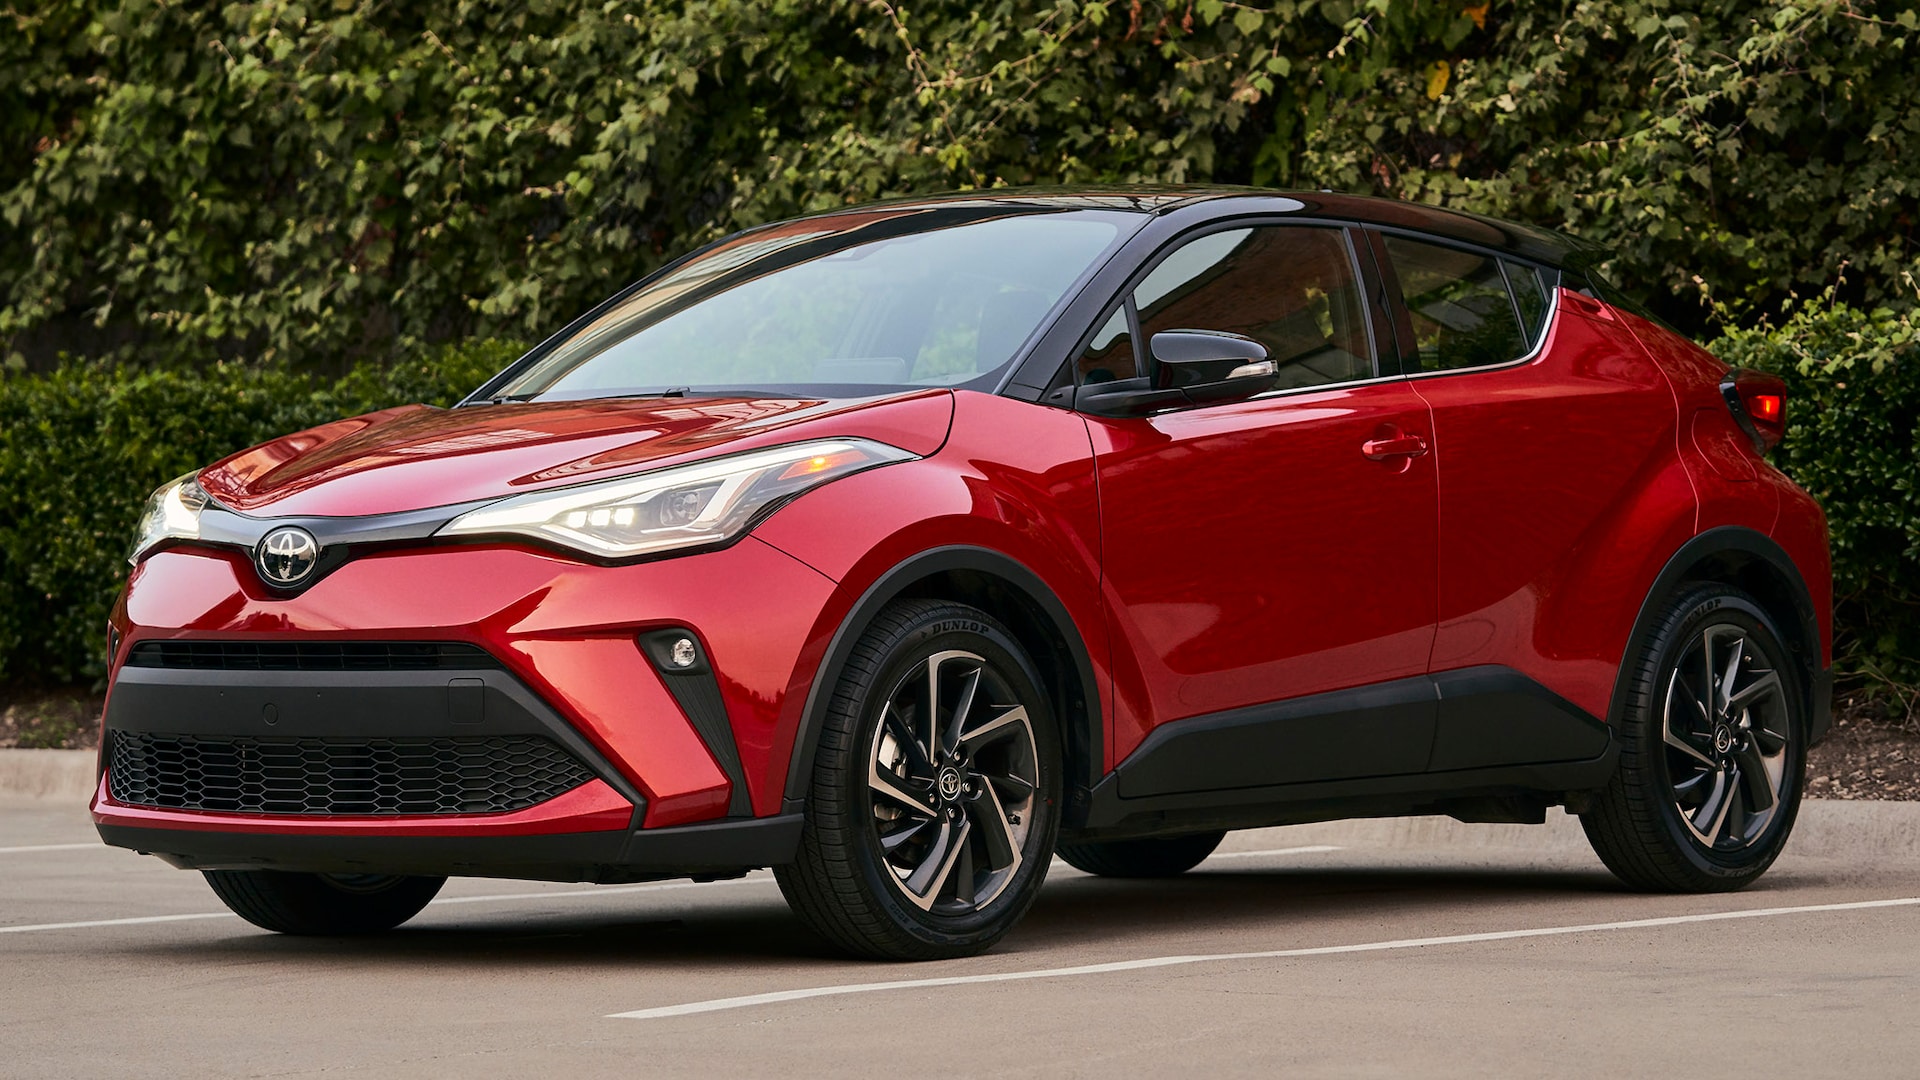 2022 Toyota C-HR Prices, Reviews, and Photos - MotorTrend